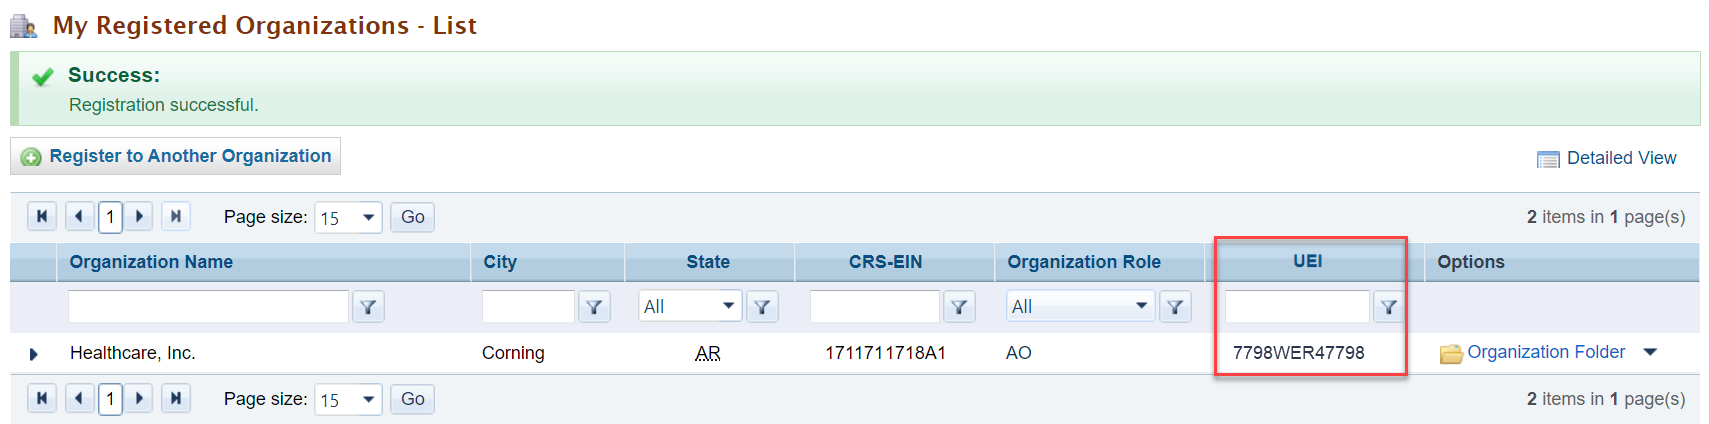 Screenshot of the My Registered Organizations List page